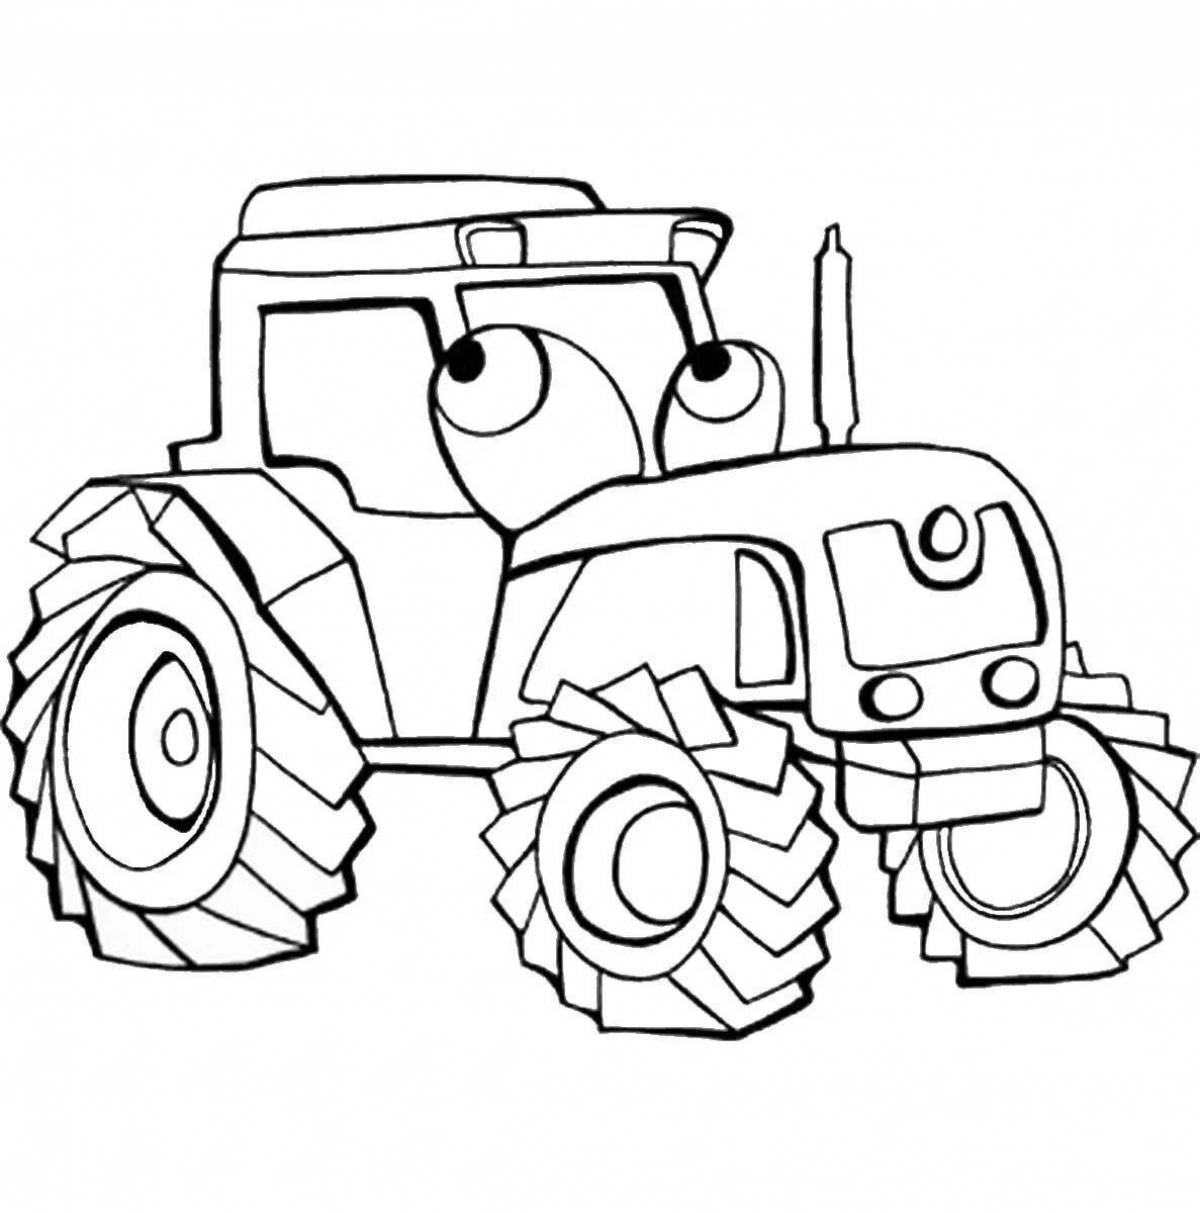 Drawing tractor for kids #6